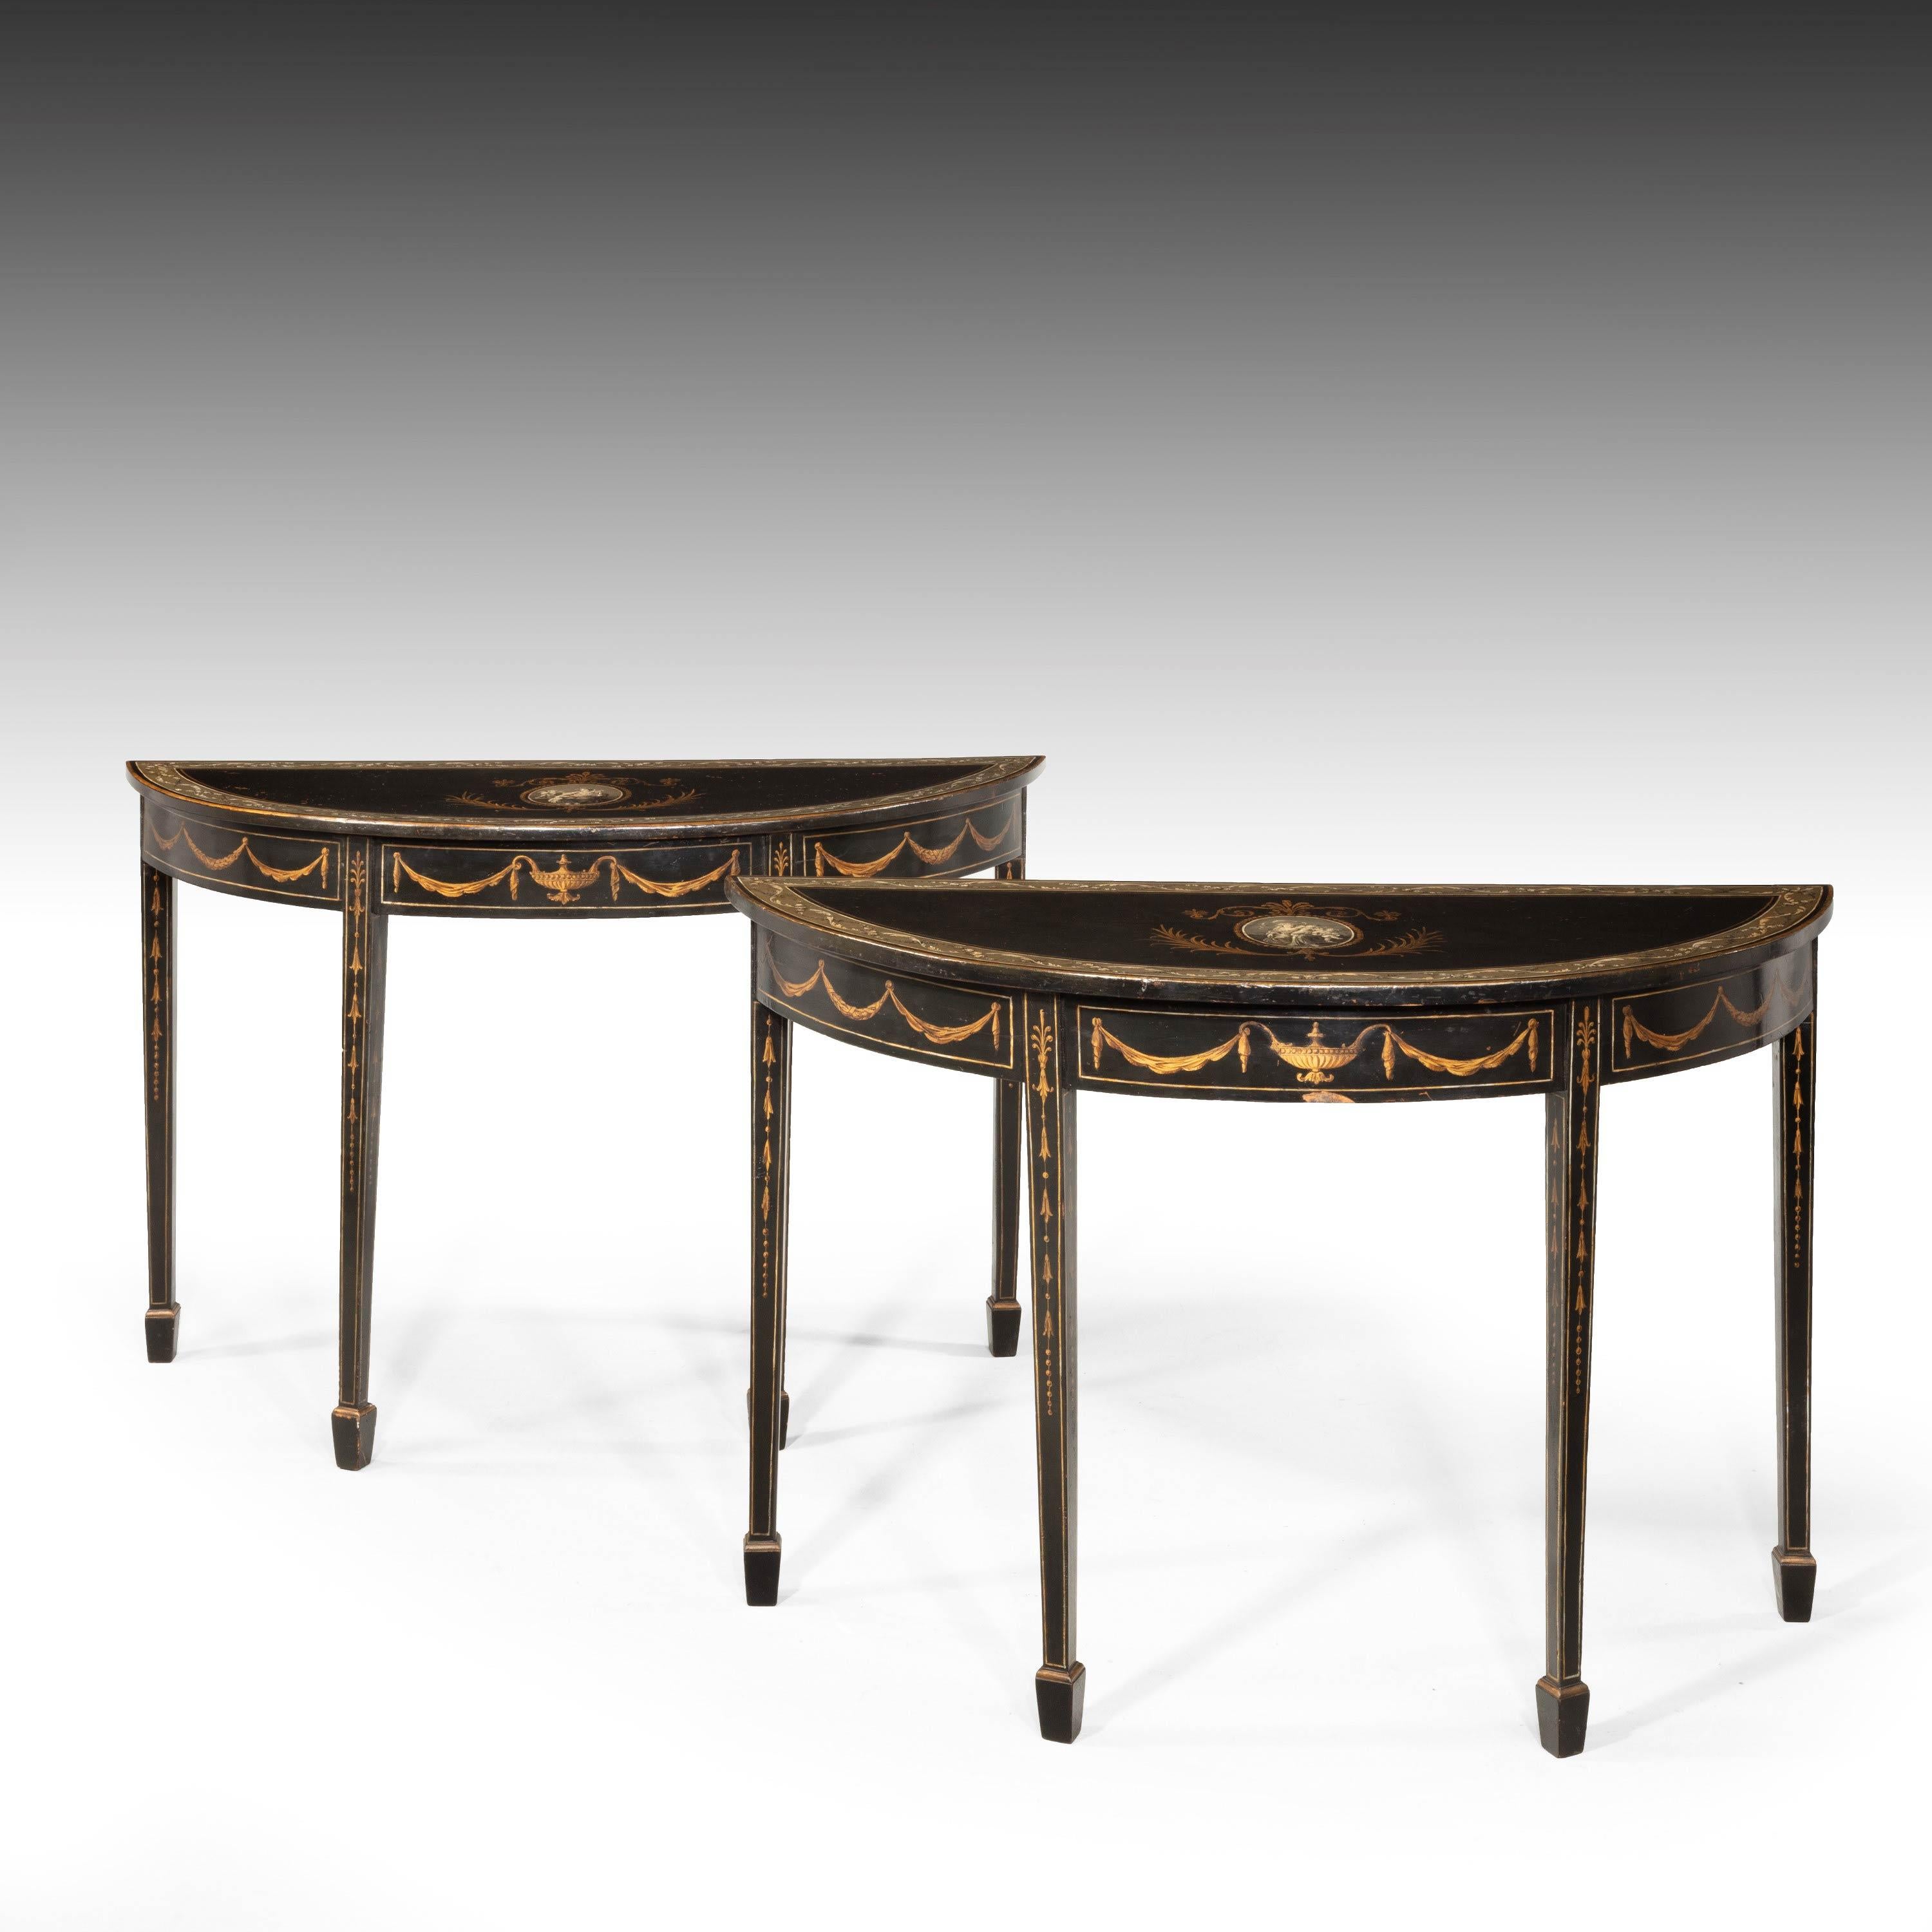 A good pair of very late George III period painted demilune pier tables. With finely executed neoclassical decoration in swags and cameo's.
 